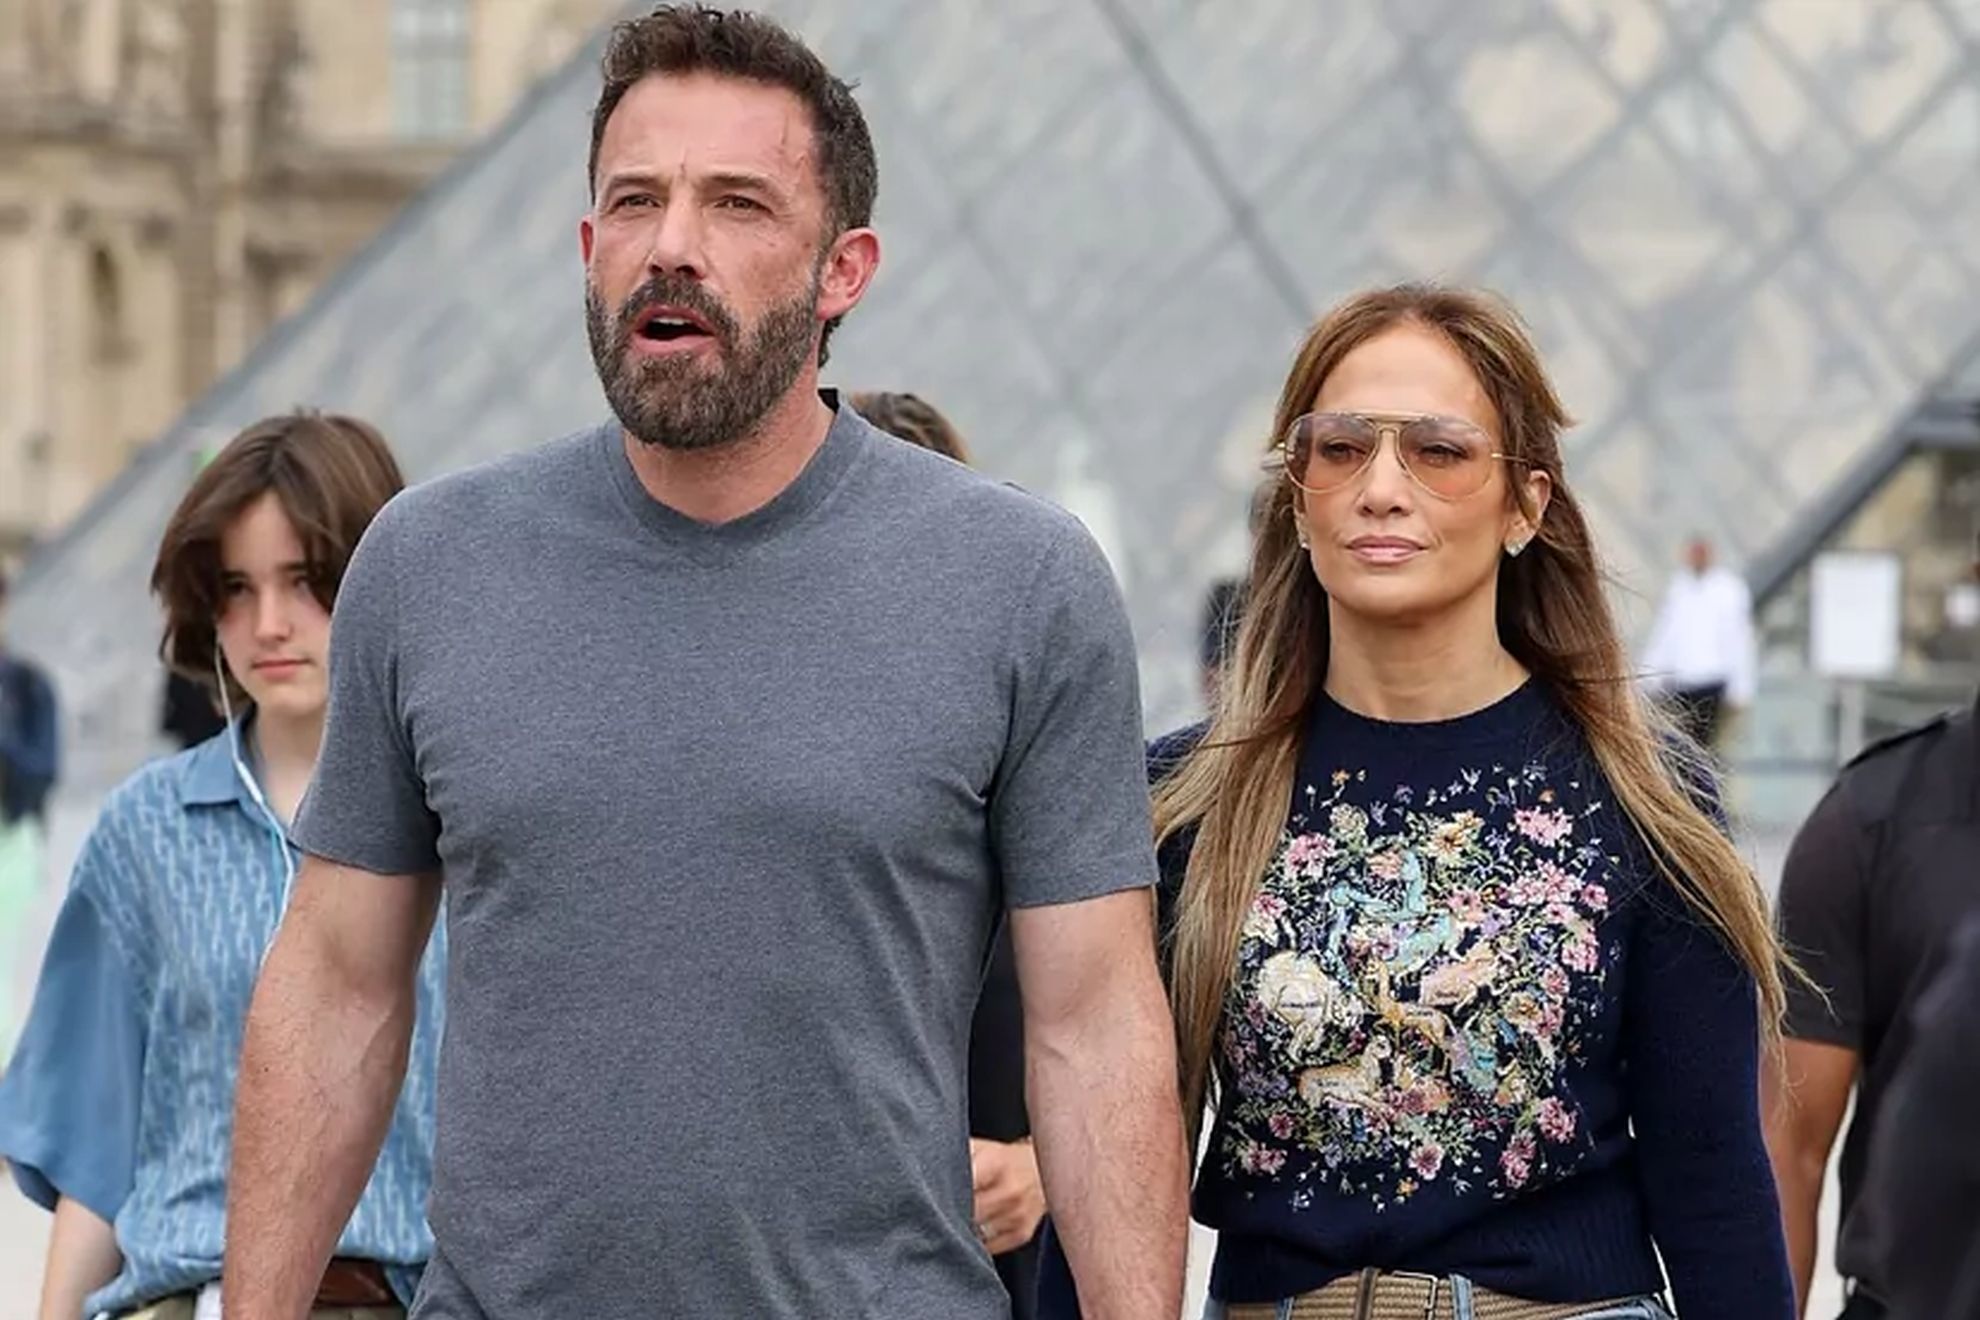 JLo and her birthday party: This is all Ben Affleck did to make her feel special